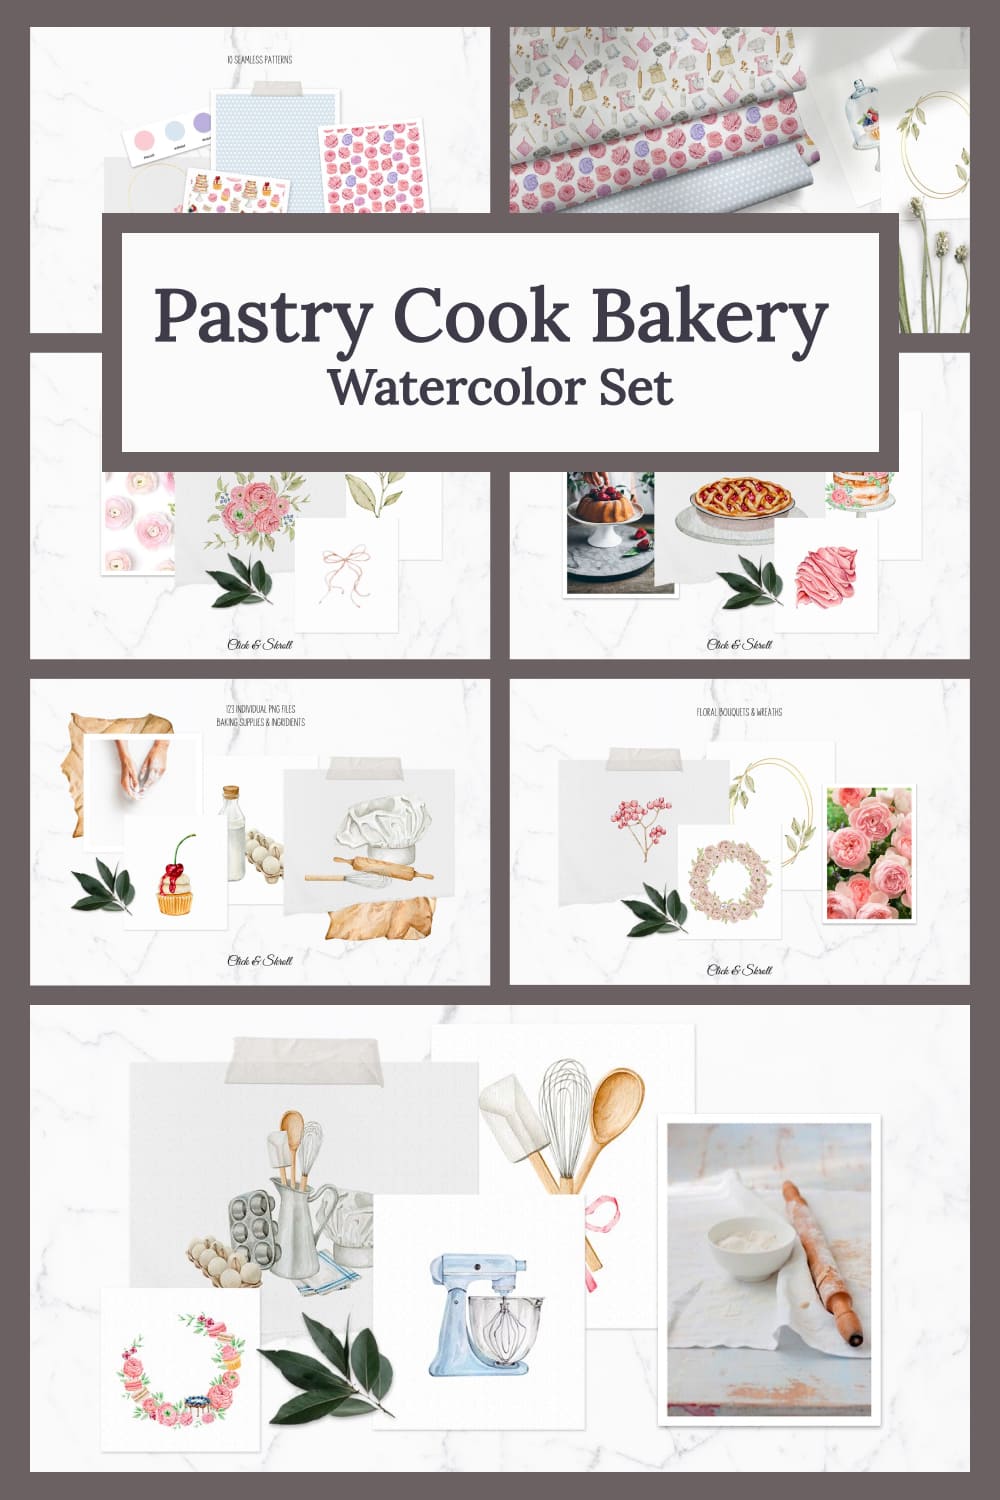 Pastry cook bakery watercolor set - pinterest image preview.